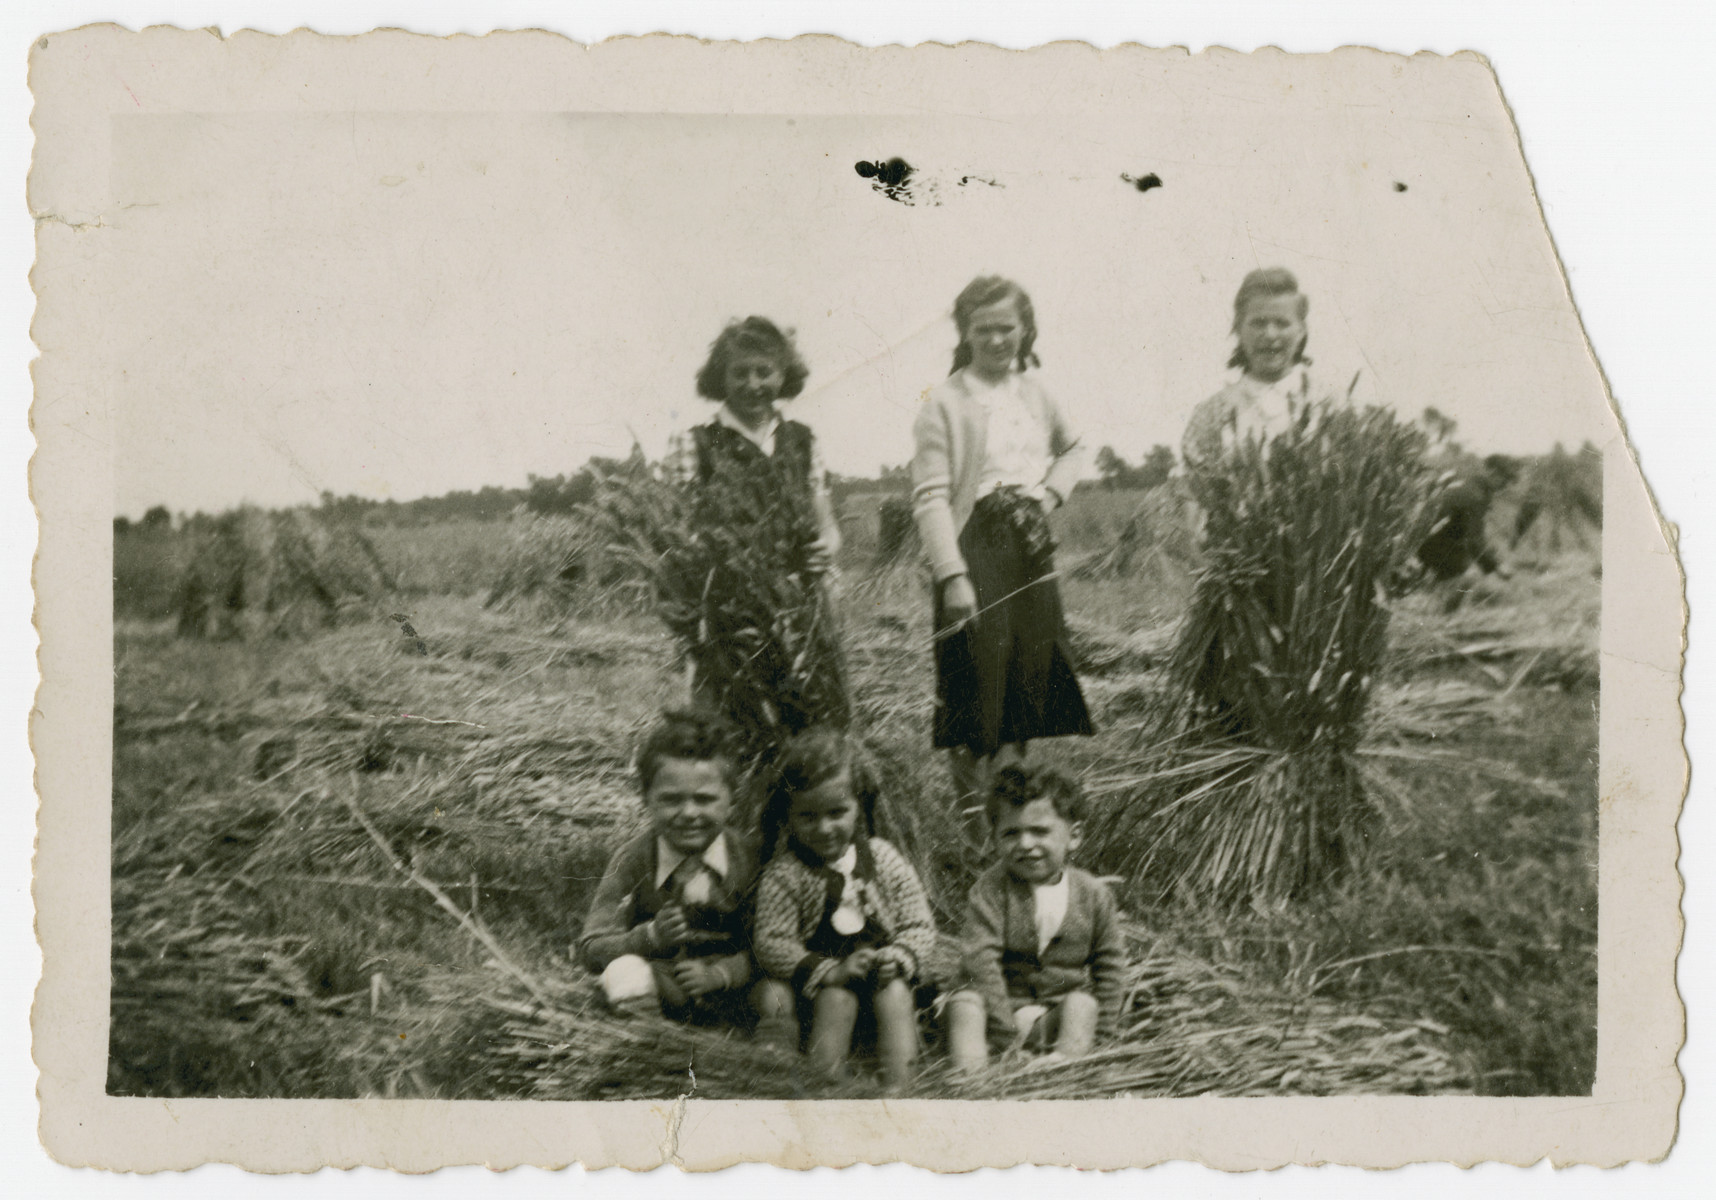 Three young Jewish children pose outside in a field in the Belgian countryside, where they are being hidden on the farm of a German maid.

Pictured in the foreground are Nestor Hochglaube (right), his brother Jacques (left), and ? Krevin in the middle.